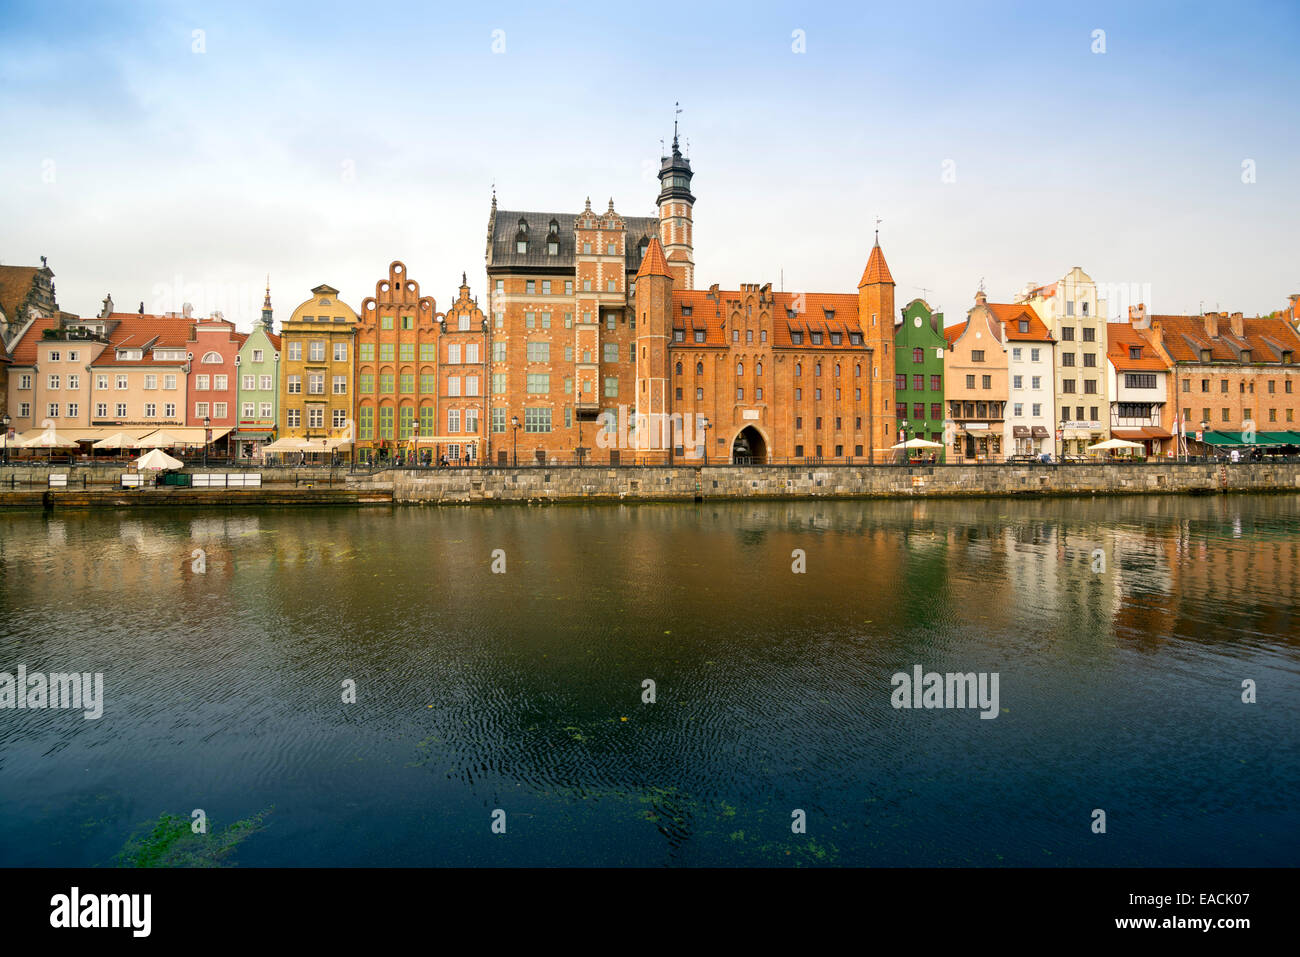 The classic view of Gdansk with the Hanseatic-style buildings reflected in the River Motlawa. Stock Photo